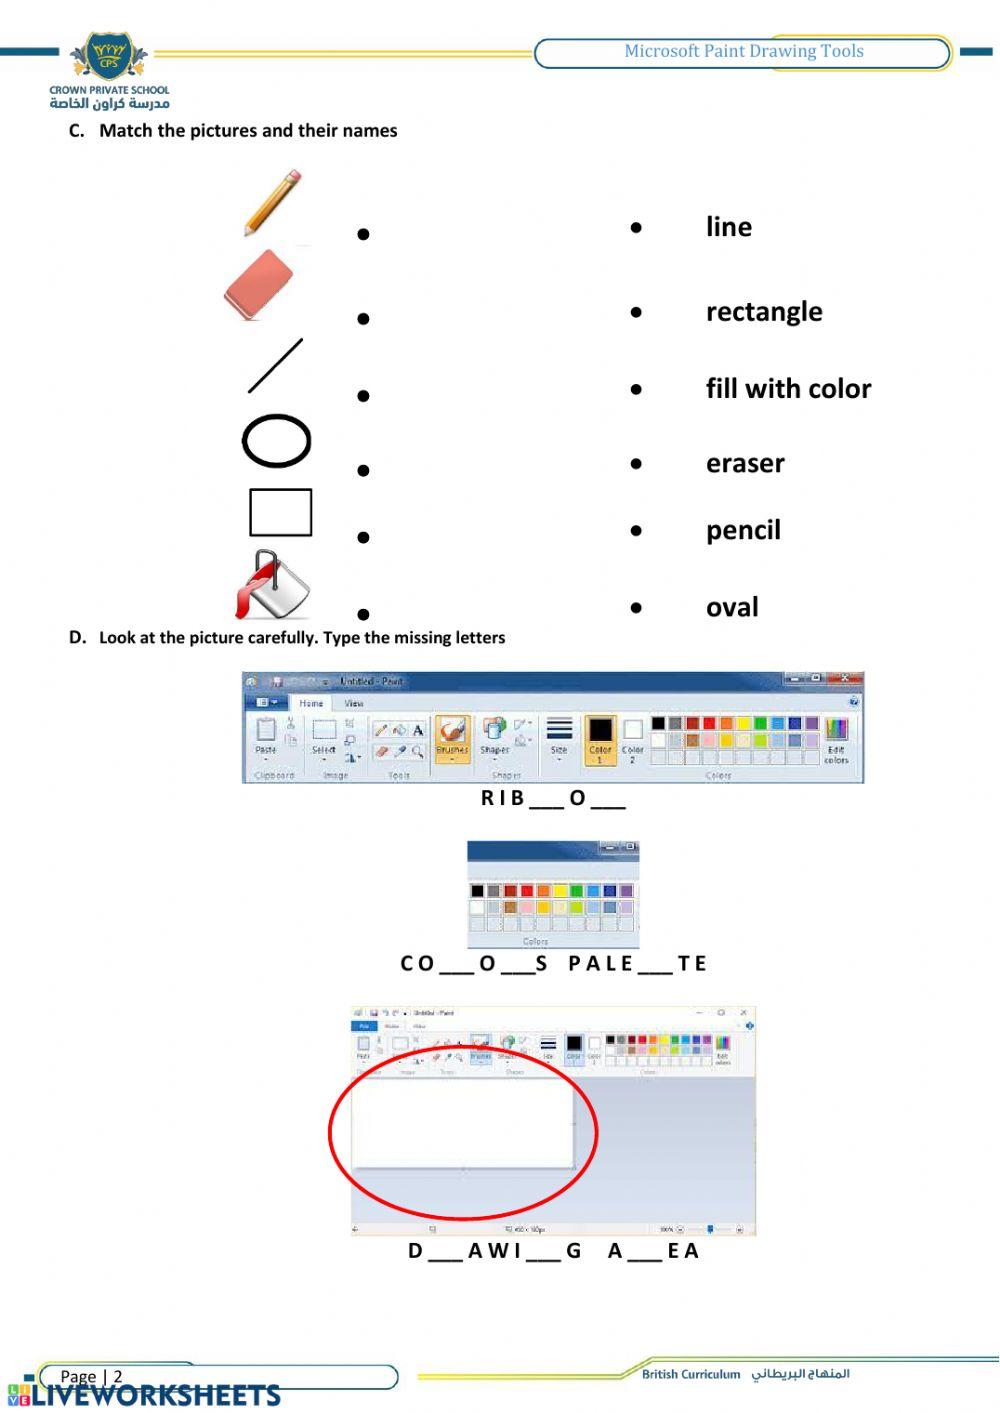 Ms Paint Drawing Tools Worksheet | Live Worksheets